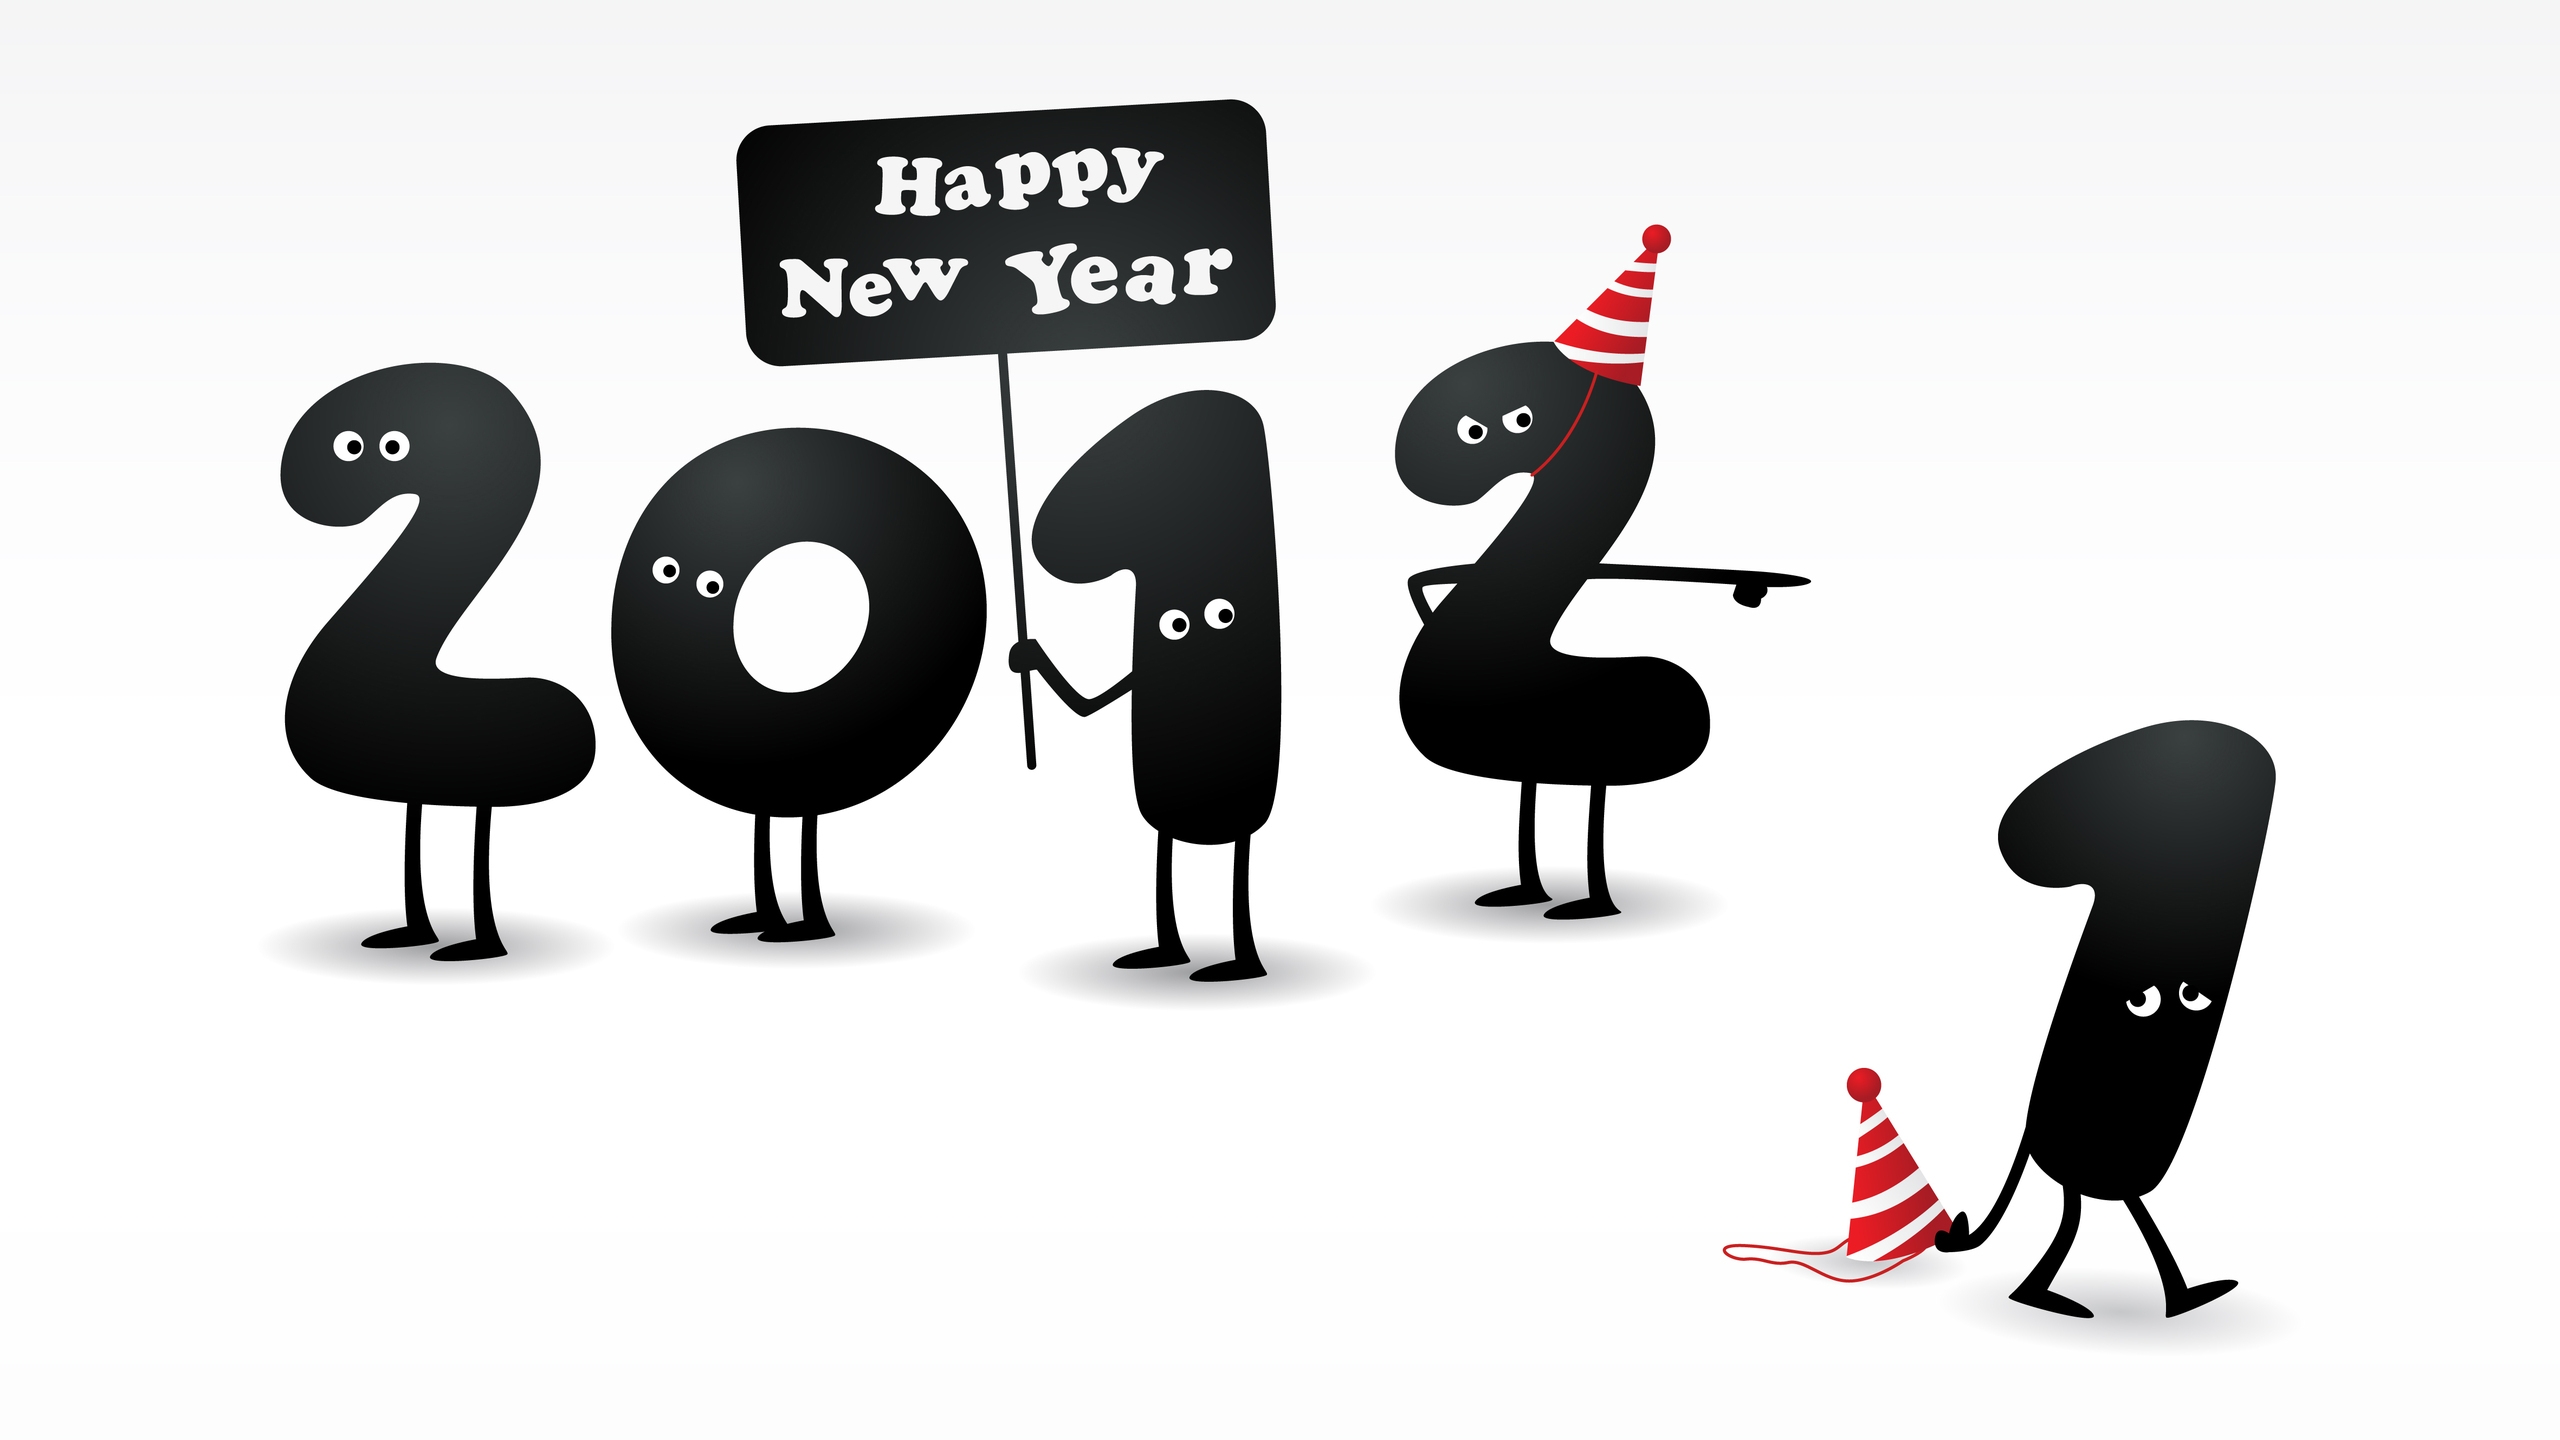 2012 Happy New Year for 2560x1440 HDTV resolution